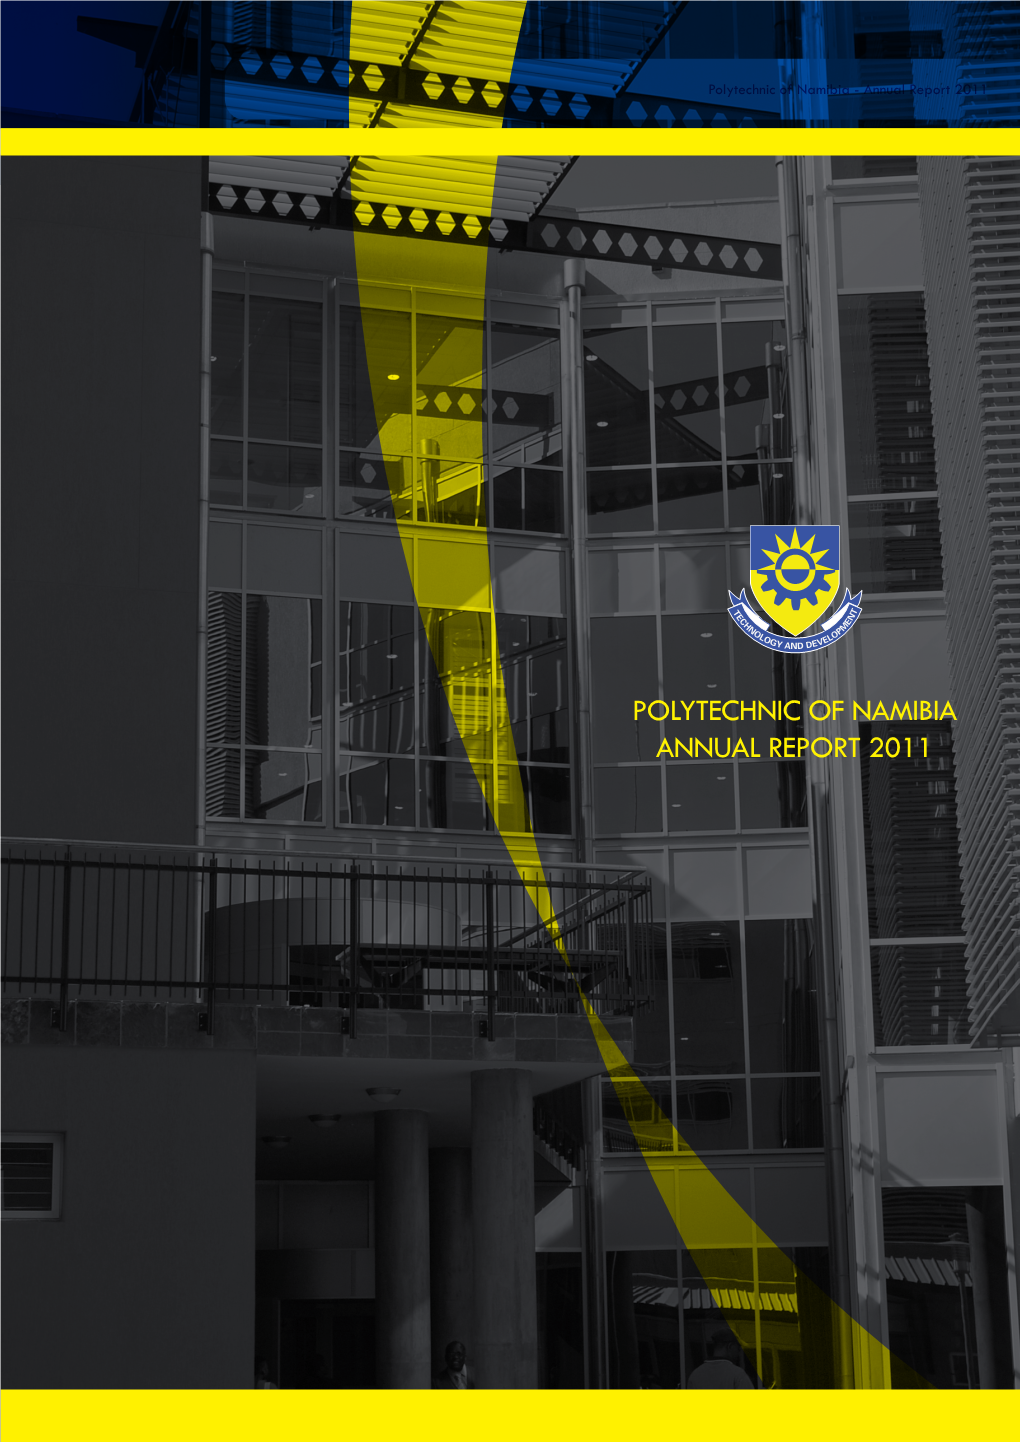 Polytechnic of Namibia Annual Report 2011